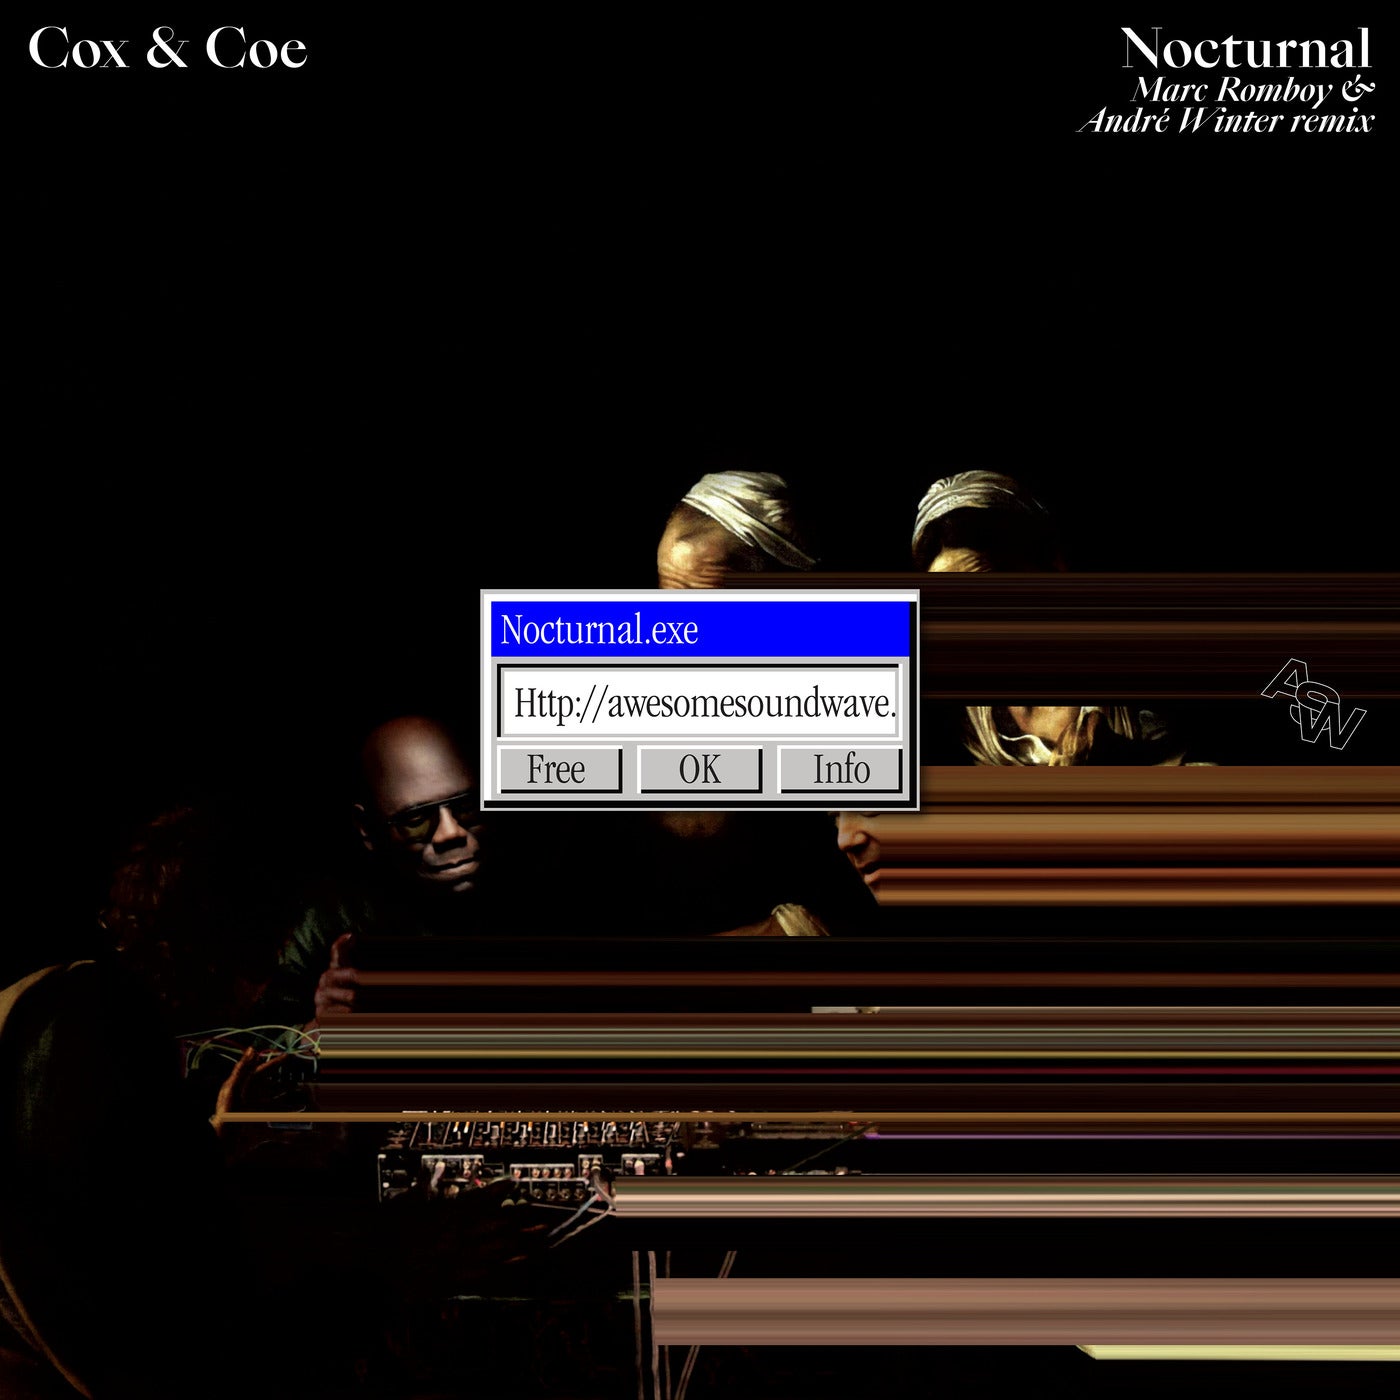 Cover - Marc Romboy, Carl Cox, Andre Winter, Christopher Coe - Nocturnal (Marc Romboy & Andre Winter Remix)